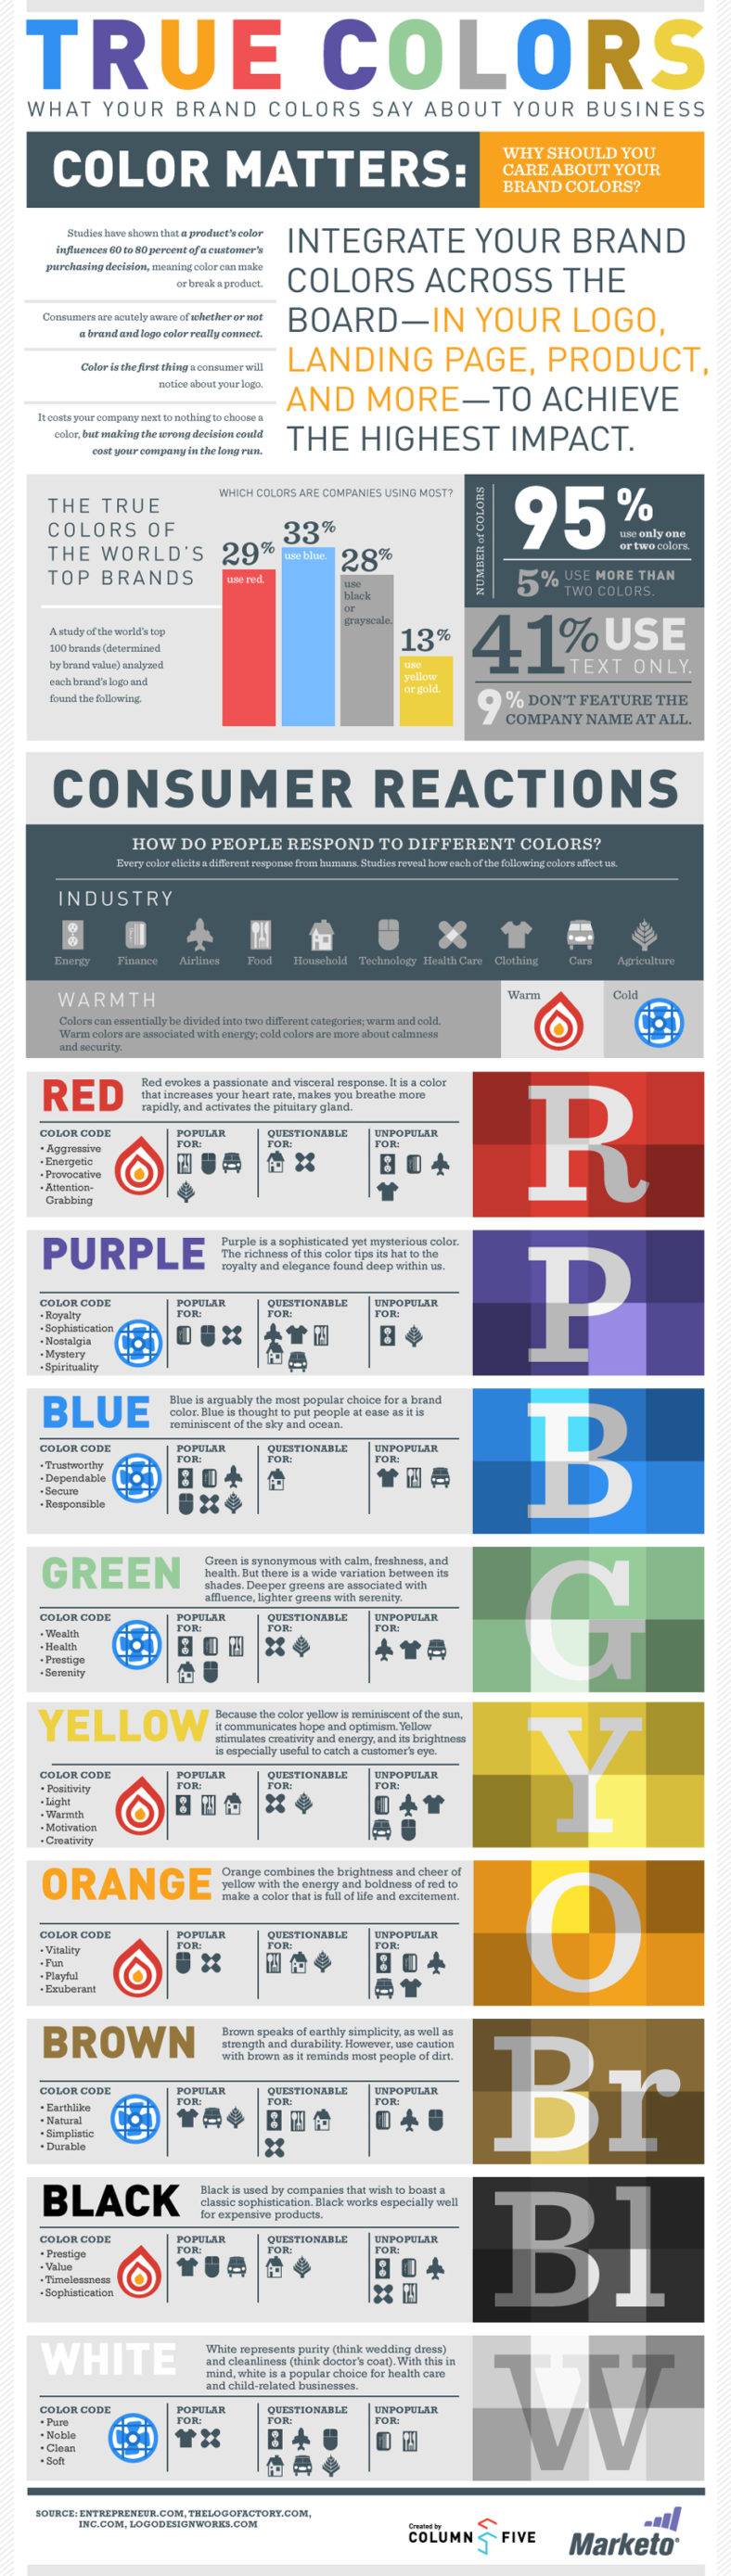 Marketo Infographic True Colors What Your Brand Colors Say About Your Business 11 788x2778 ?width=320